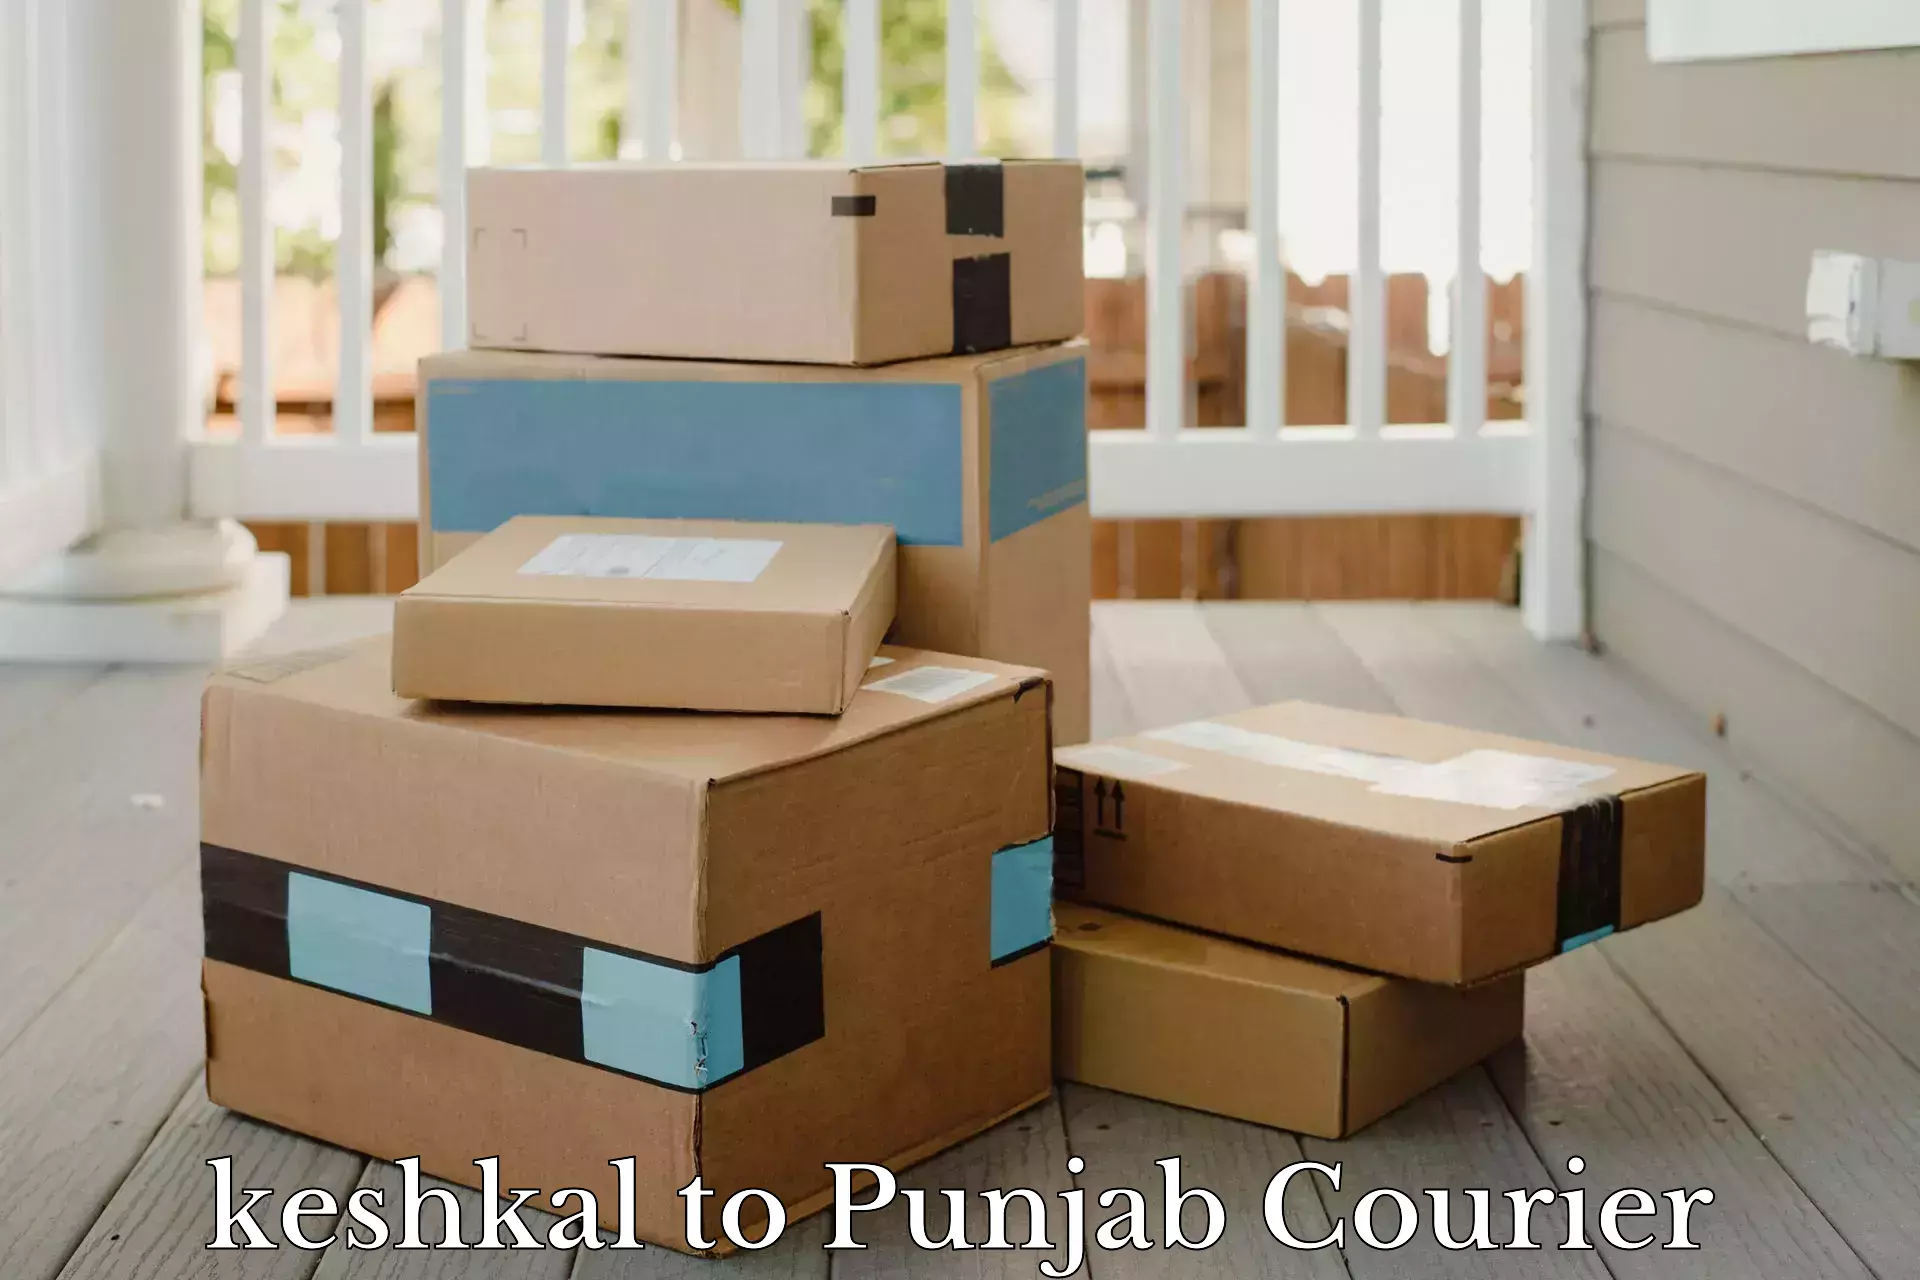 Overnight delivery services keshkal to Nangal